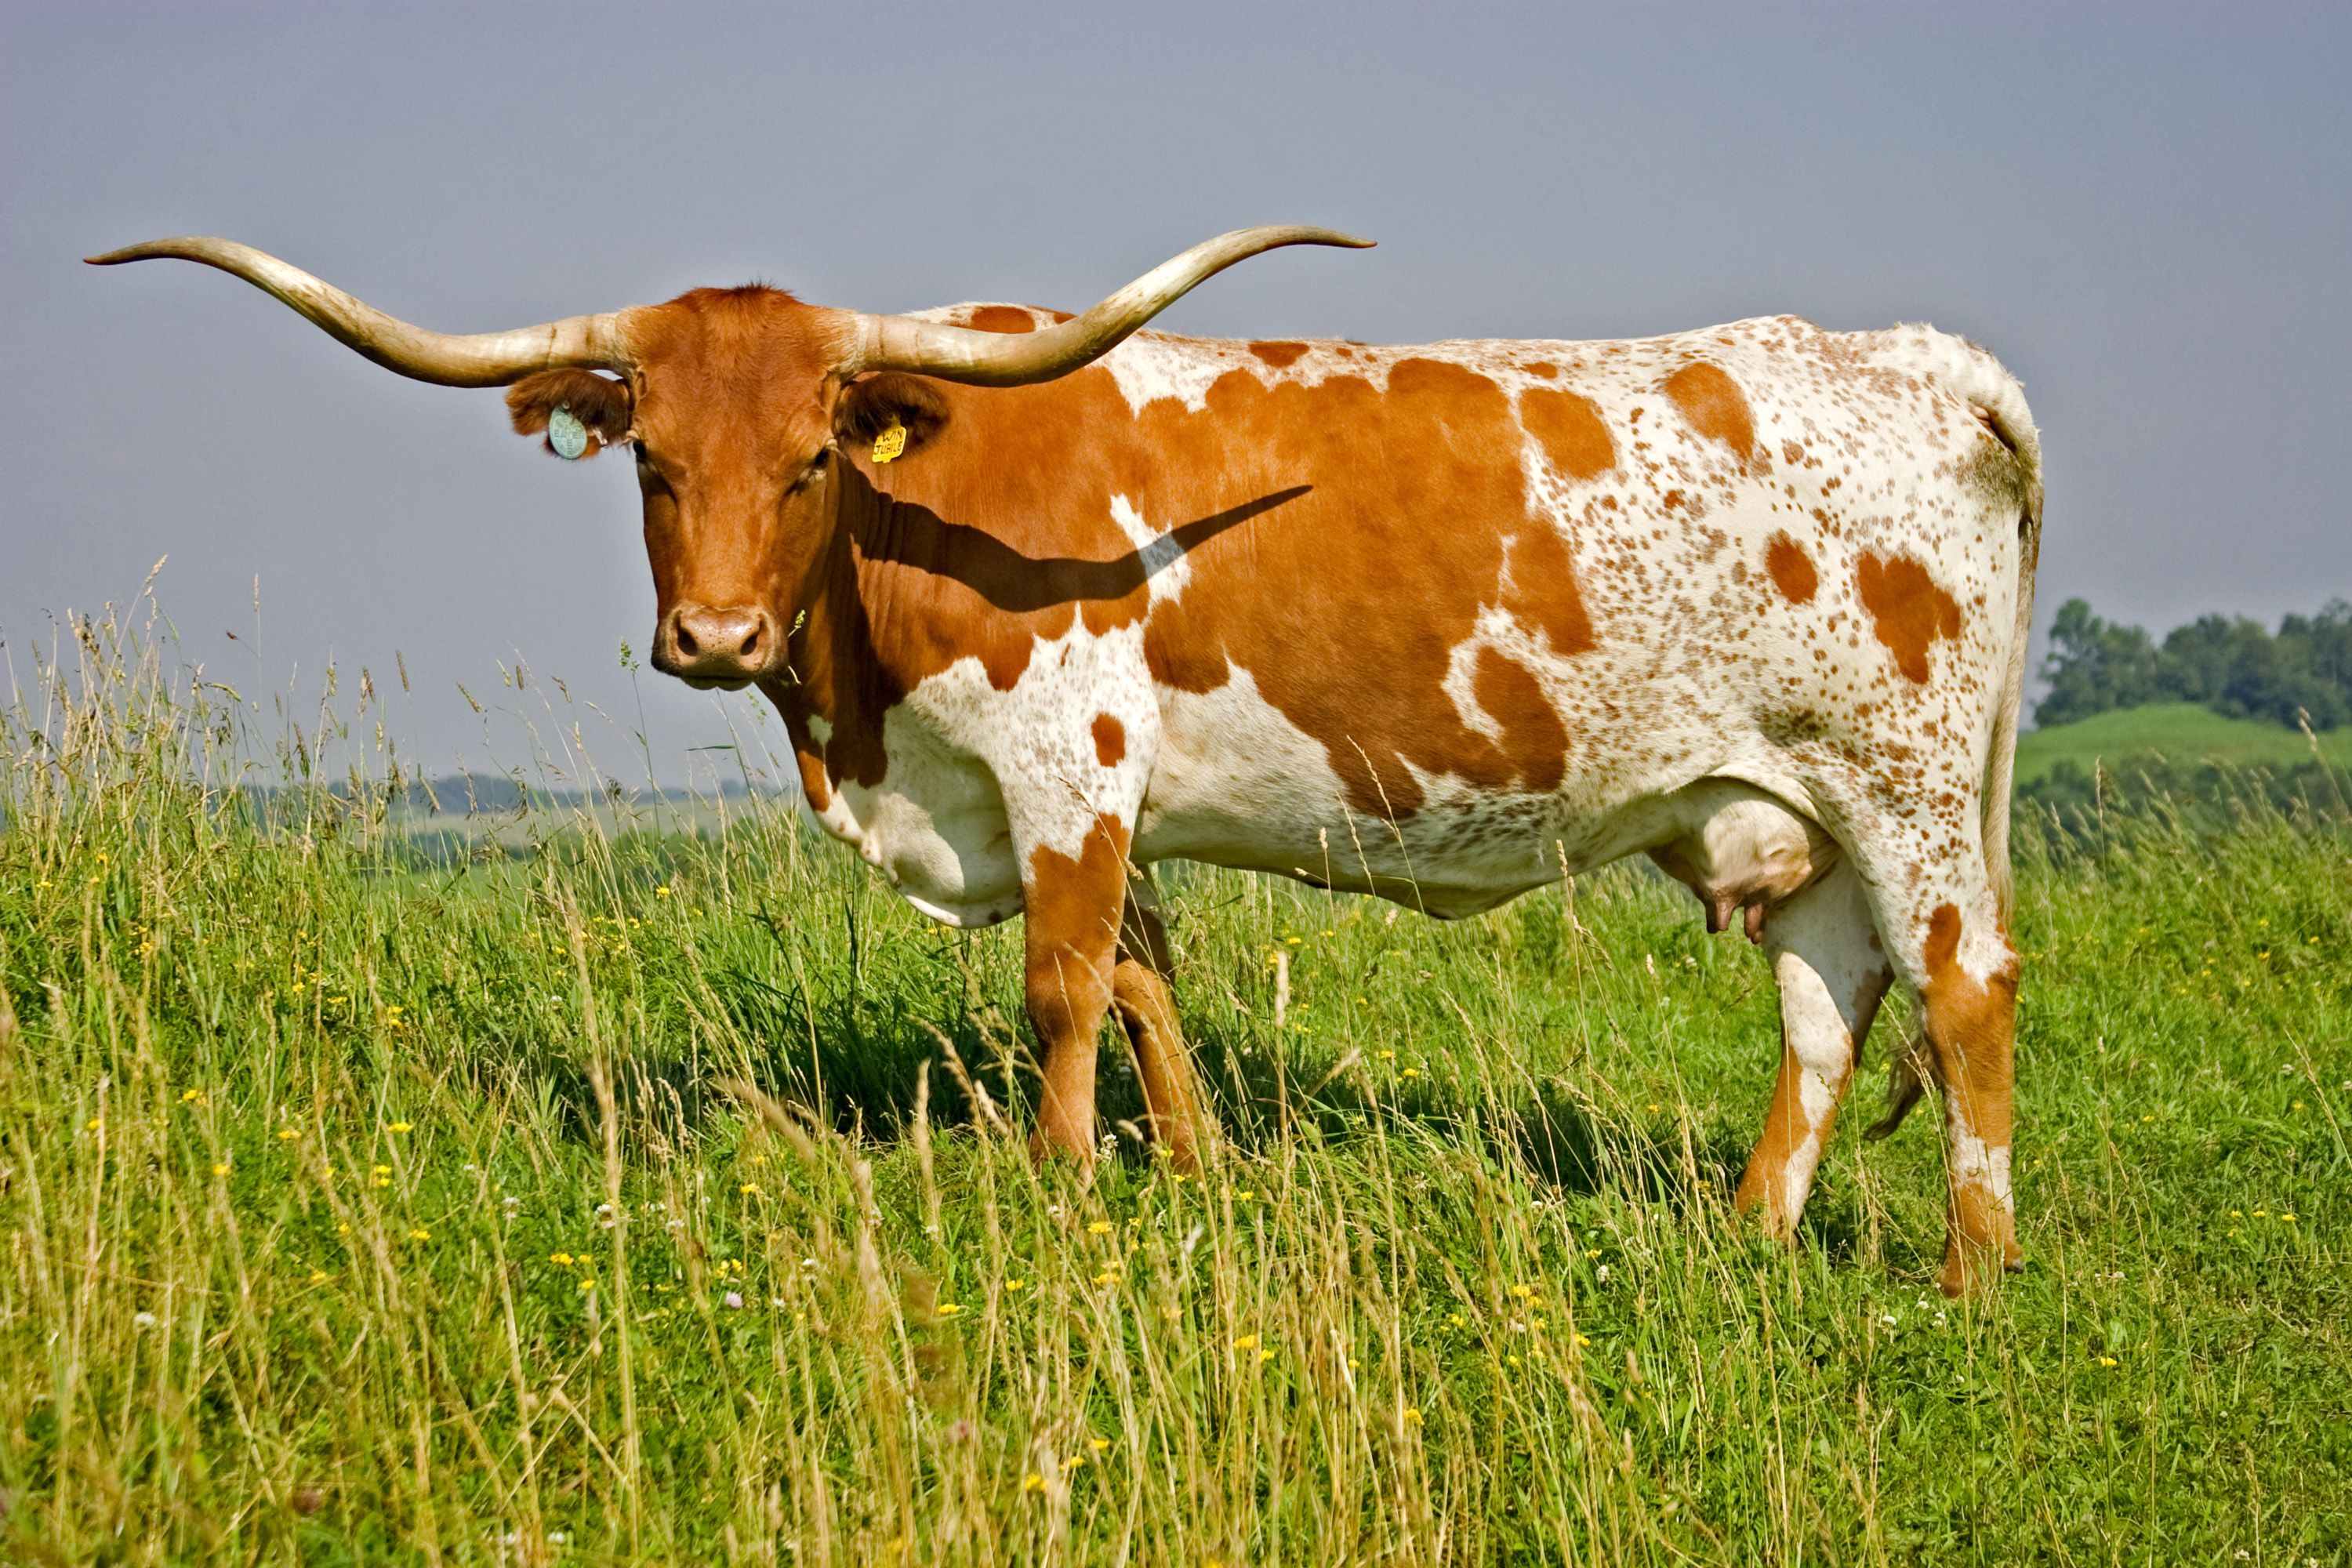 Texas Longhorn Cattle at Dickinson Cattle Co. - Photo Assortment ...